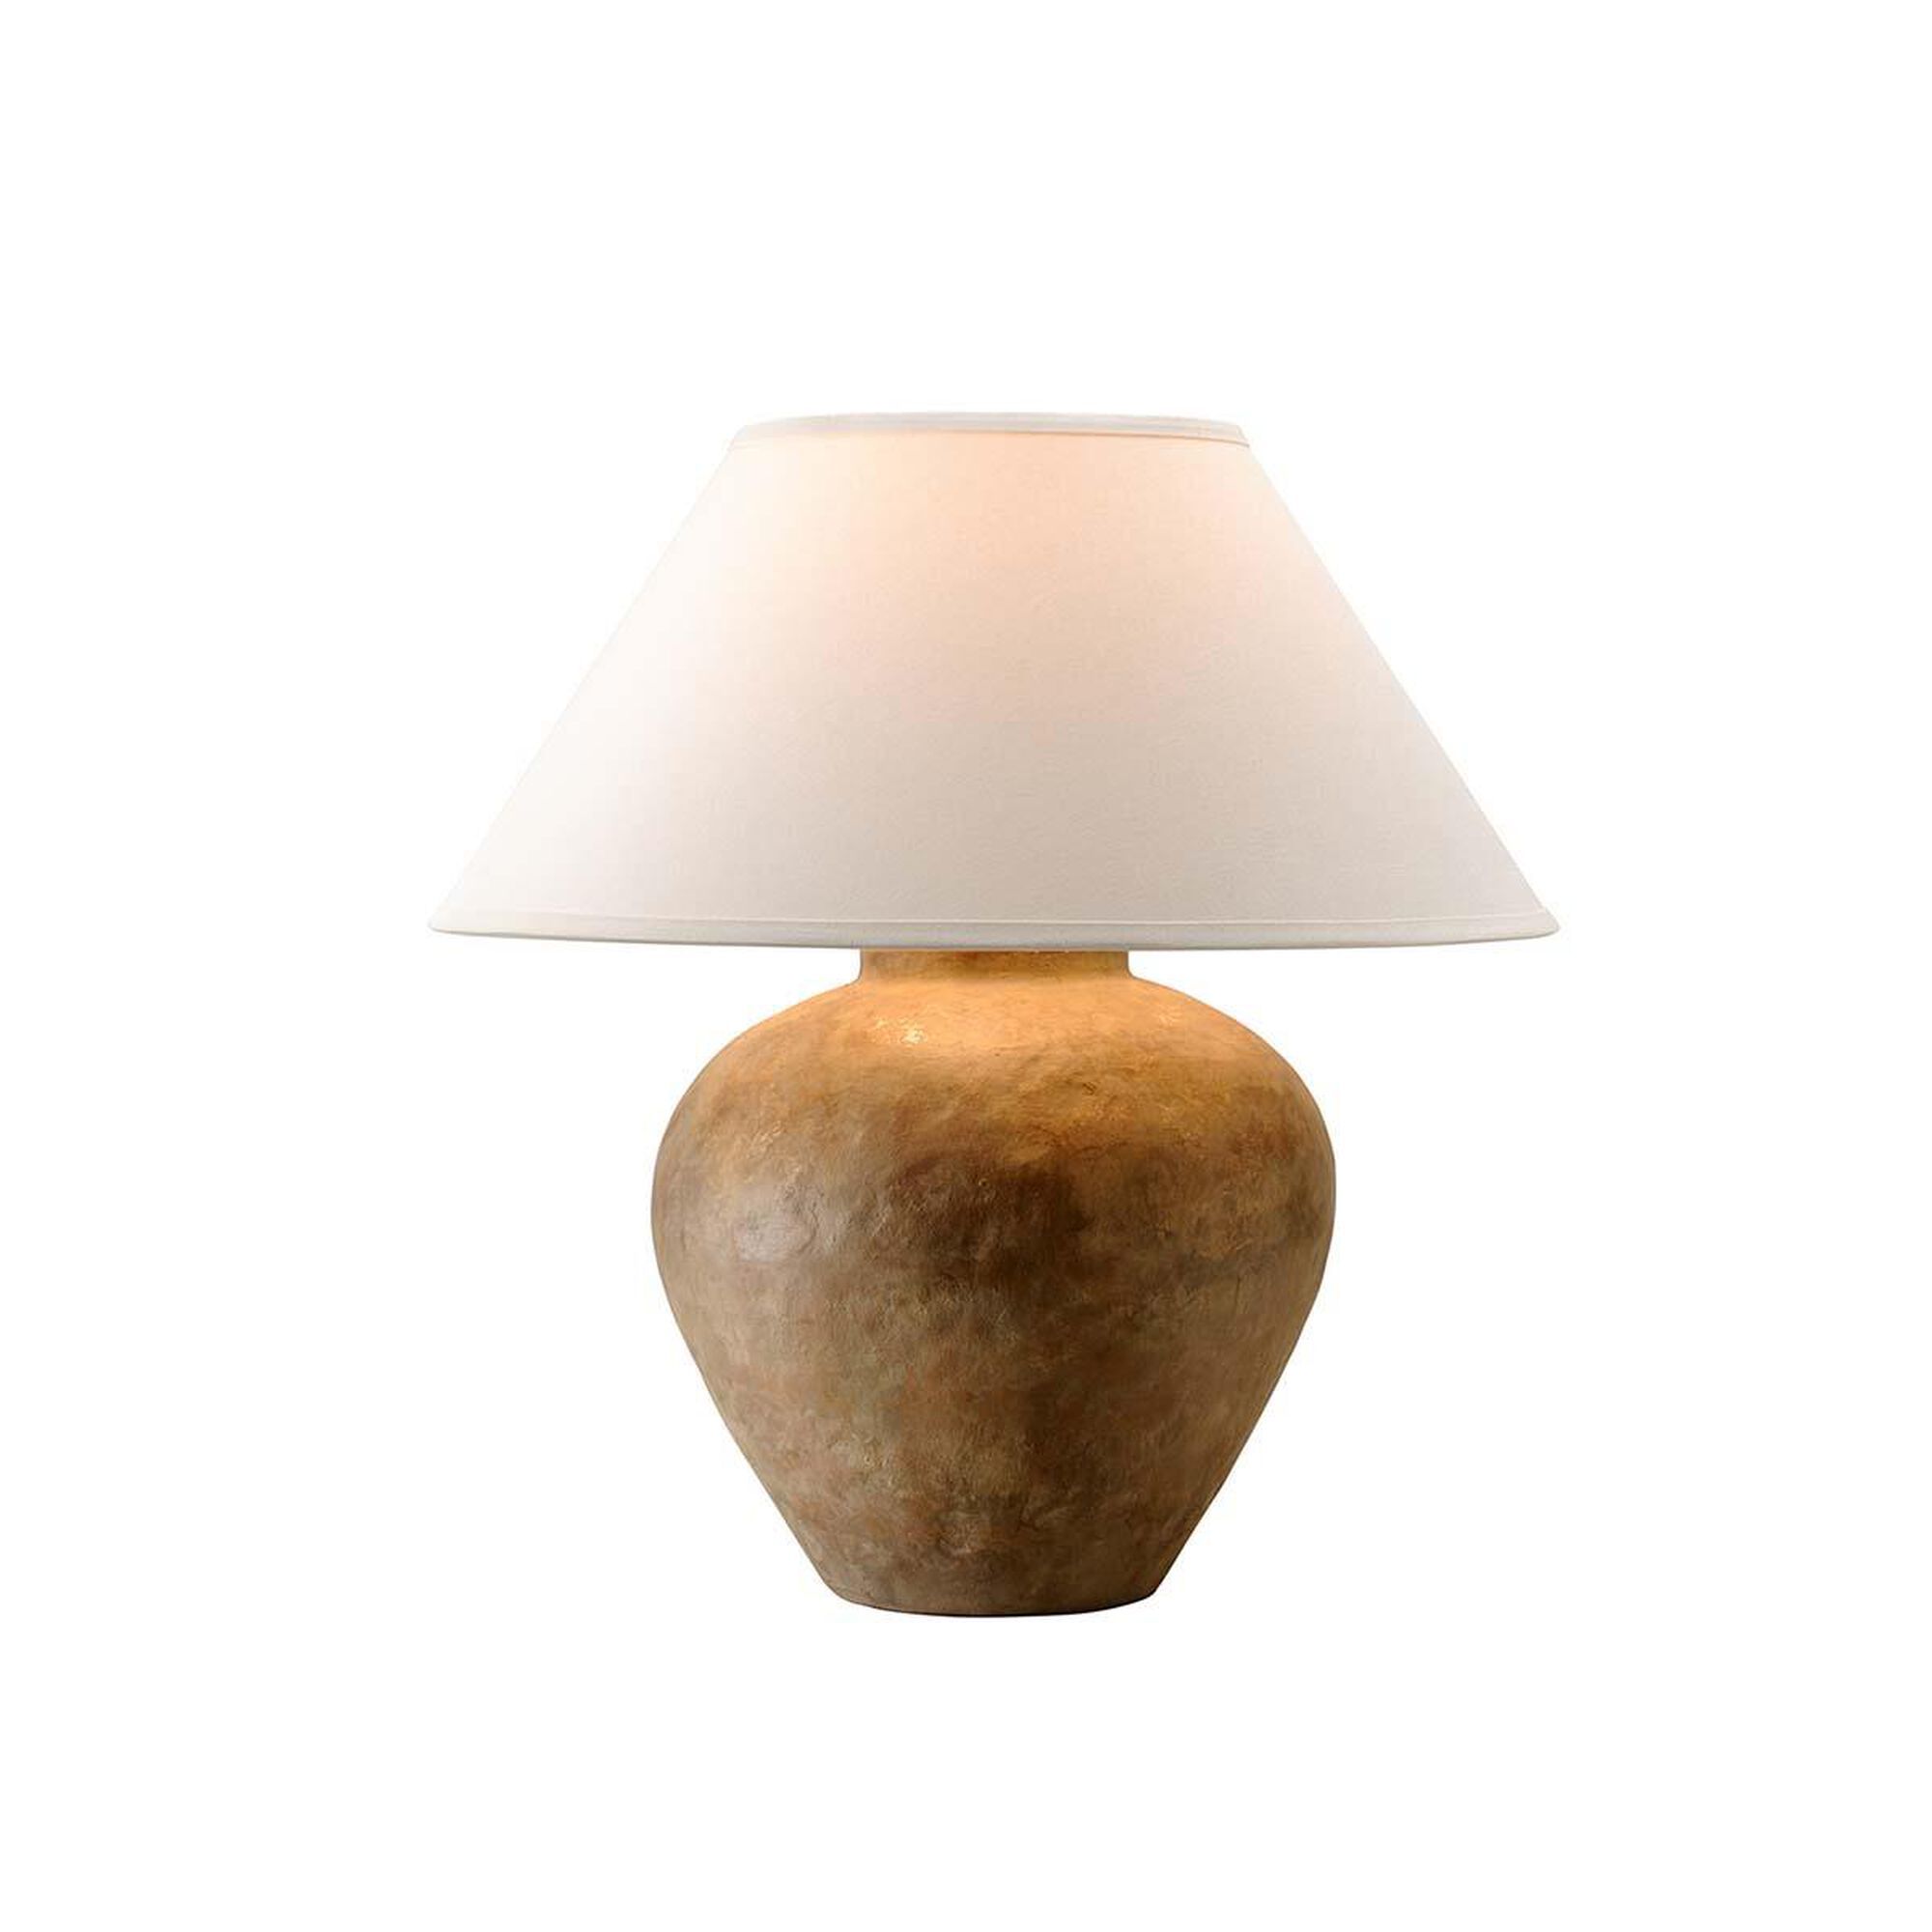 Calabria 23 Inch Table Lamp by Troy Lighting | Capitol Lighting 1800lighting.com